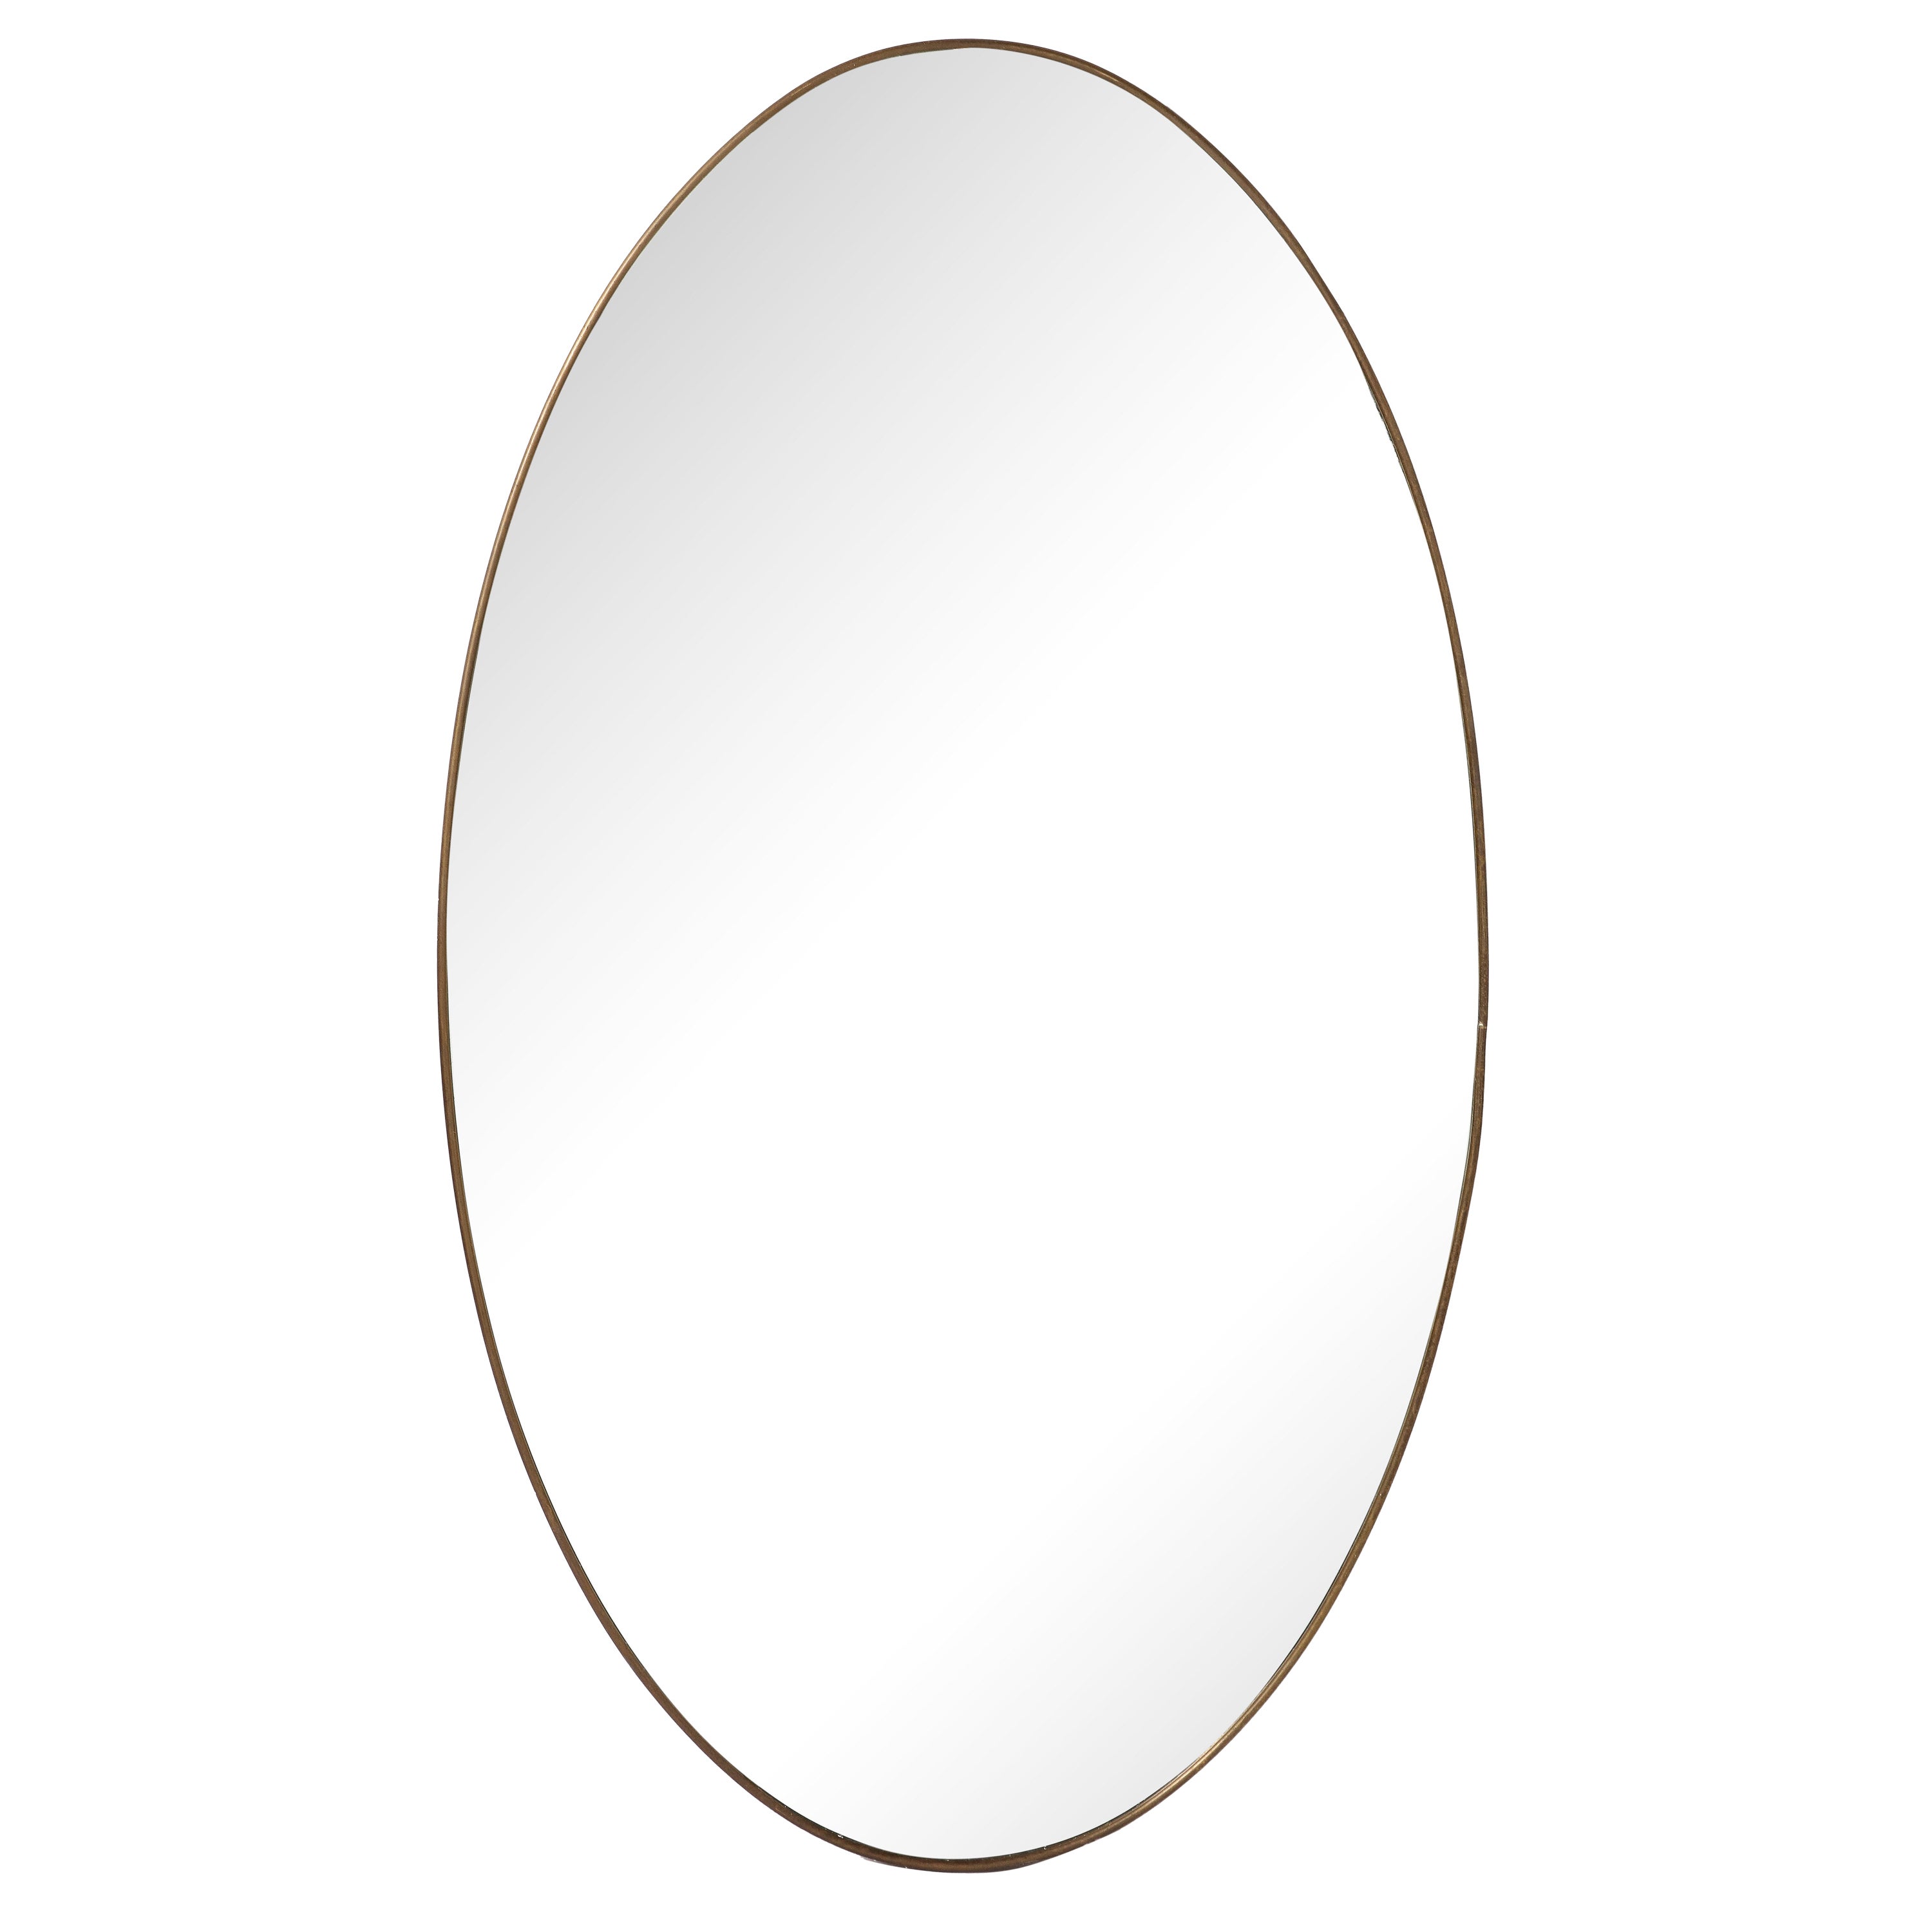 Italian Modernist Brass Oval Grand Scale Wall Mirror, Italy, circa 1950 For Sale